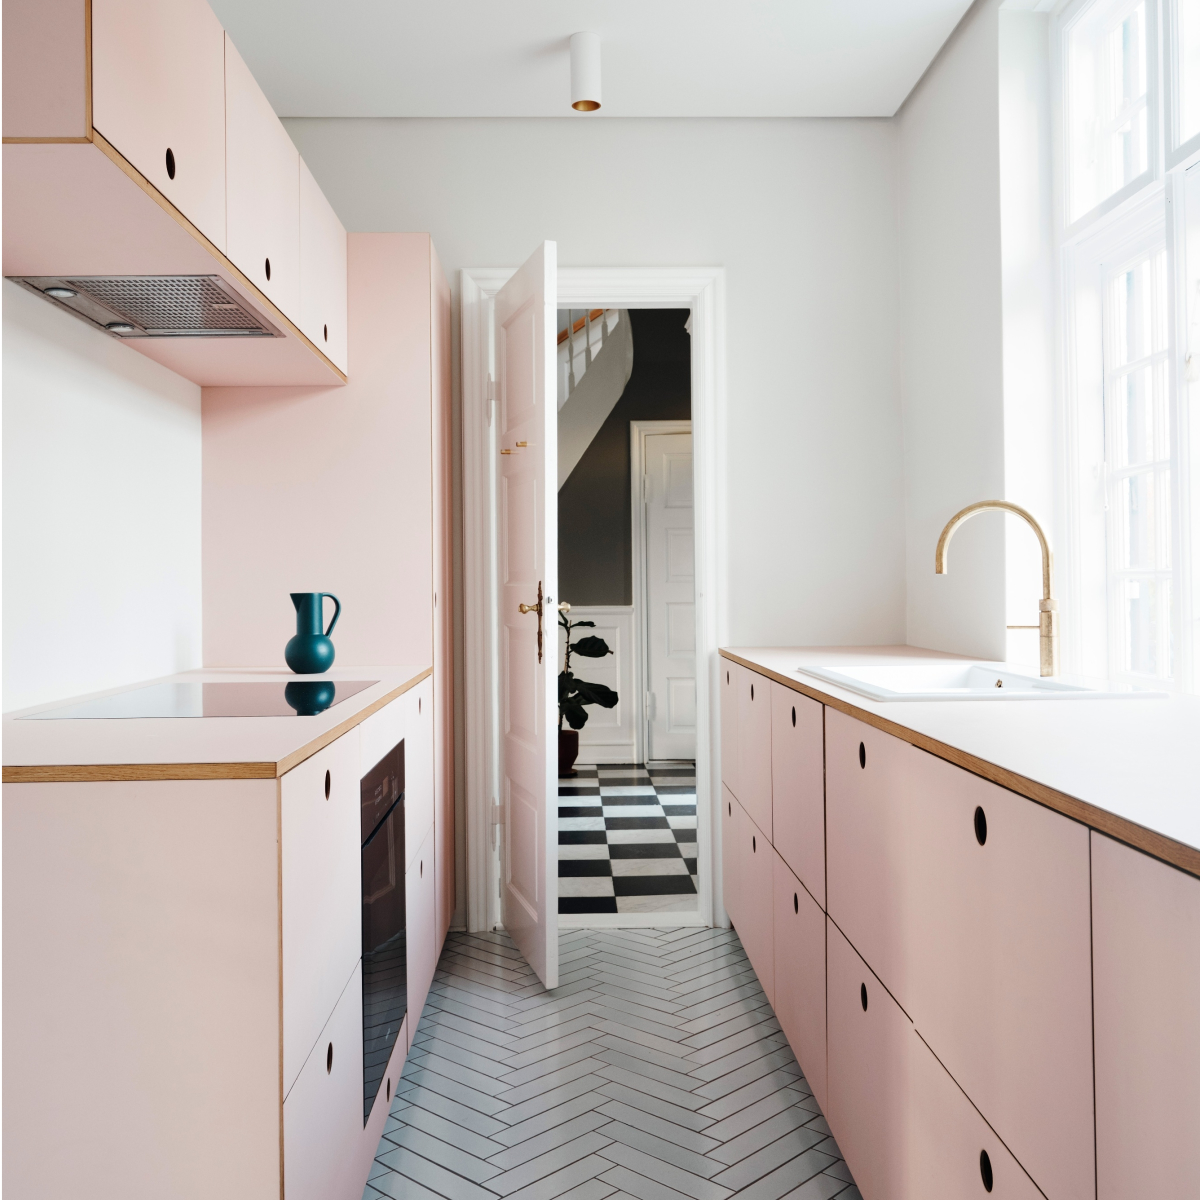 Kitchen fronts by Reform out of Copenhagen   Berlin   CREME GUIDES